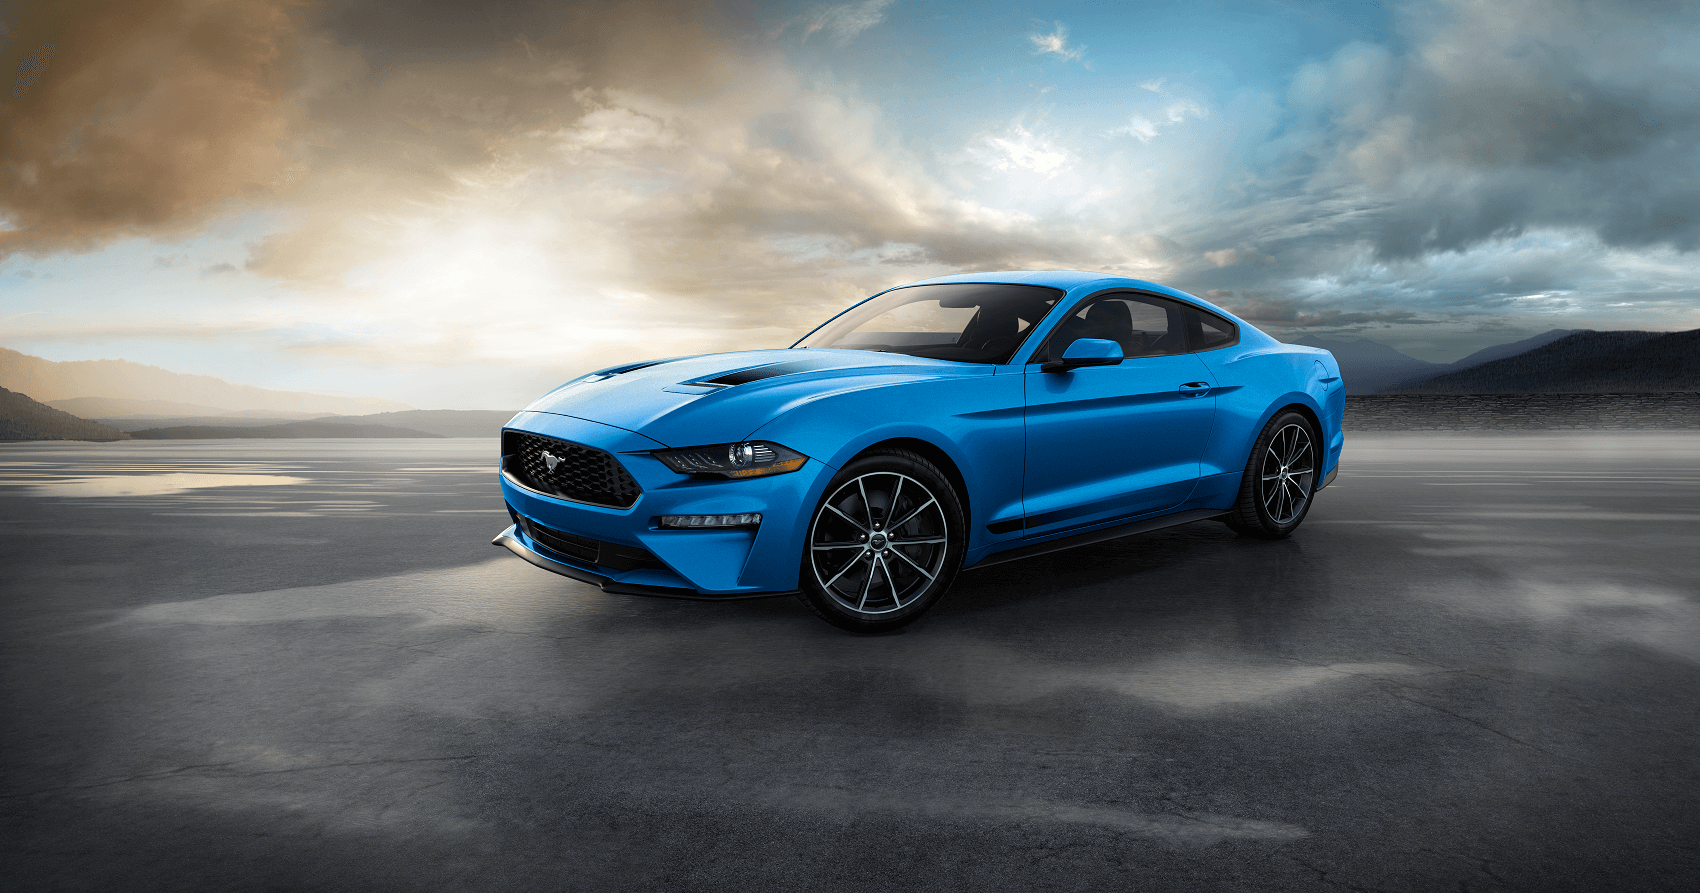 Used Ford Mustang for Sale Newport News VA
